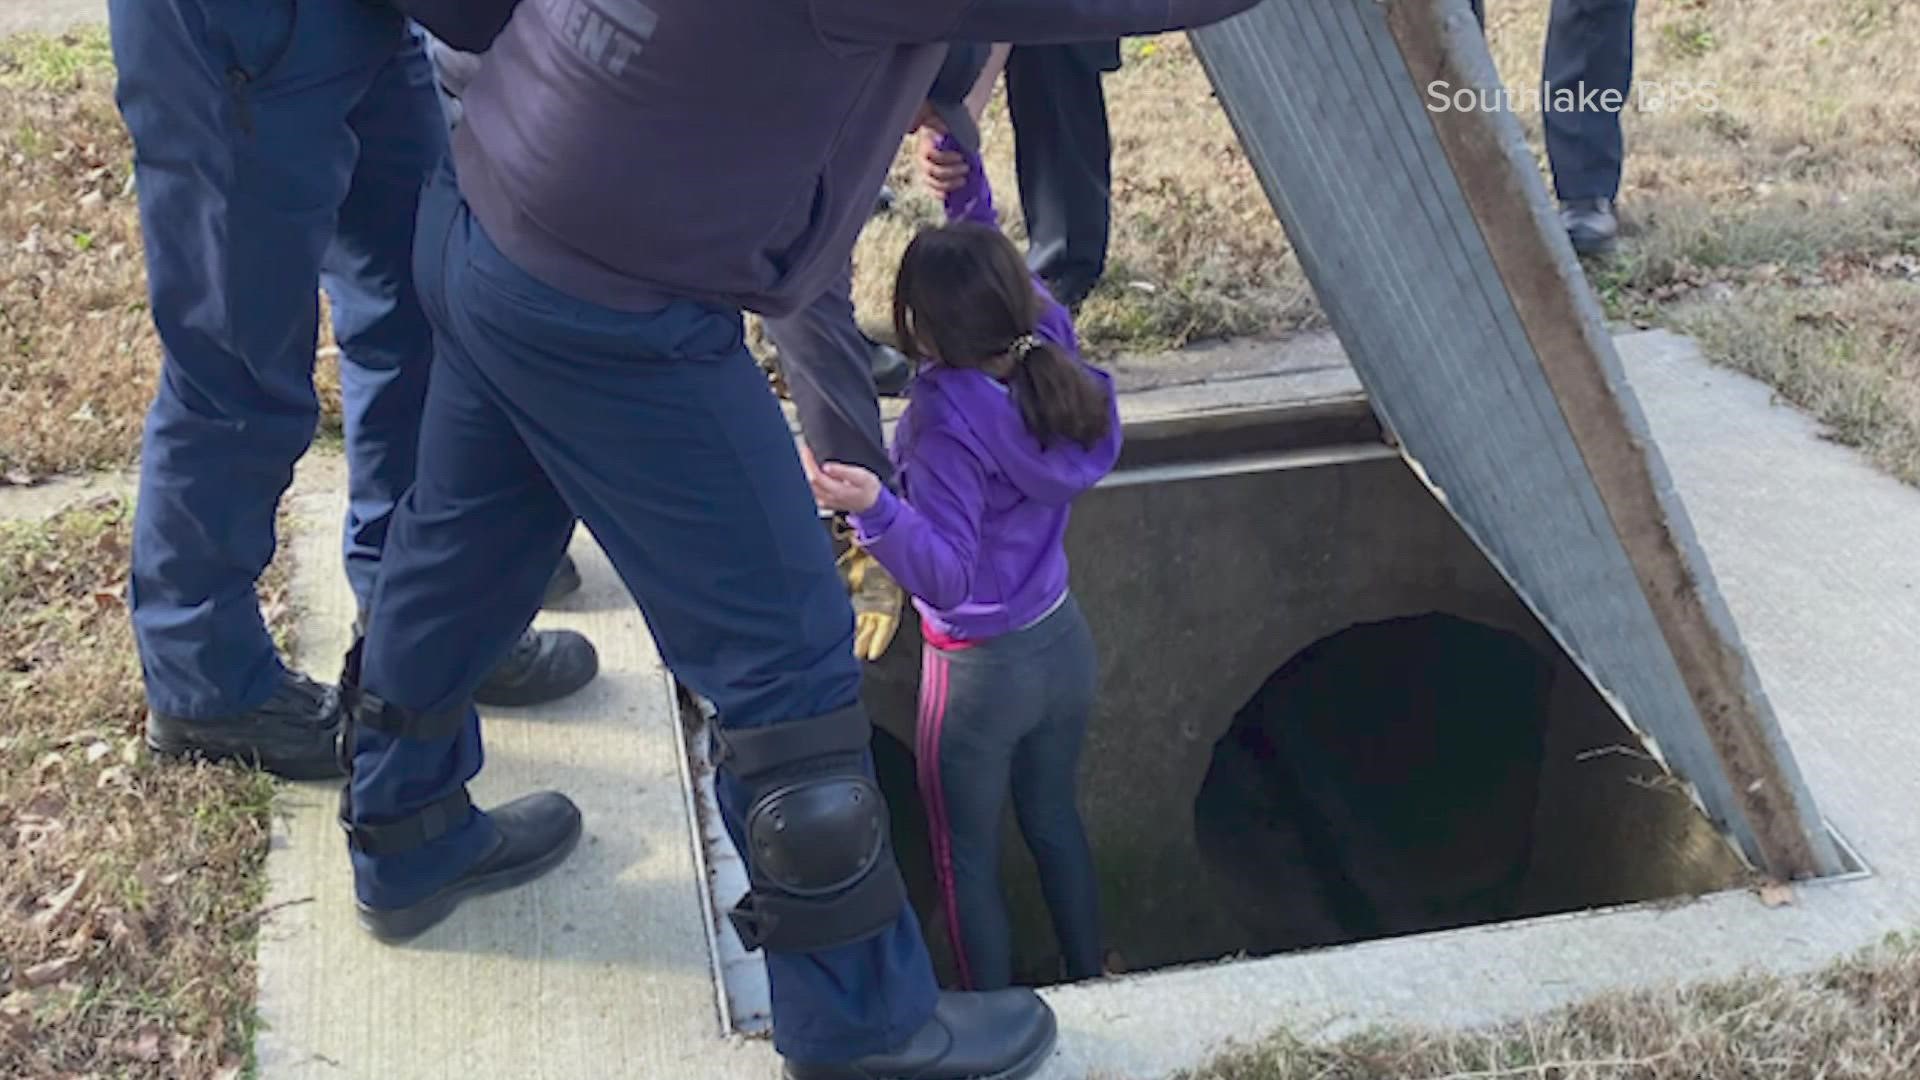 Tori and Carly wanted to play outside after being stuck in quarantine. It was all fun and games until Tori crawled into a drainage pipe, police said.